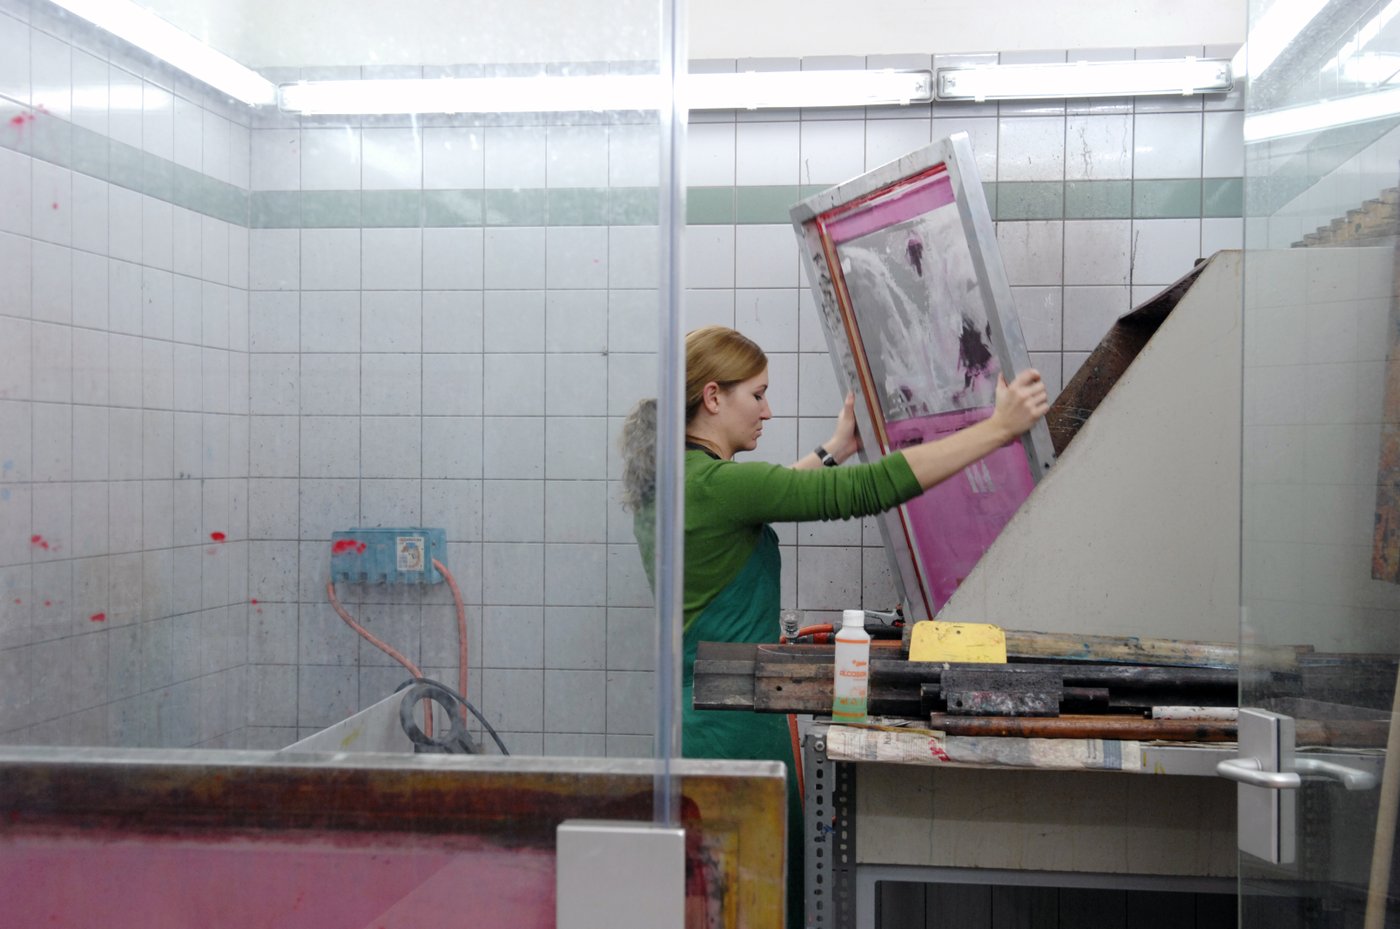 A student is working in the screen printing workshop. She has a green apron on and is holding up the screen printing frame. The walls are tiled and partially glazed. There are all kinds of equipment lying around.